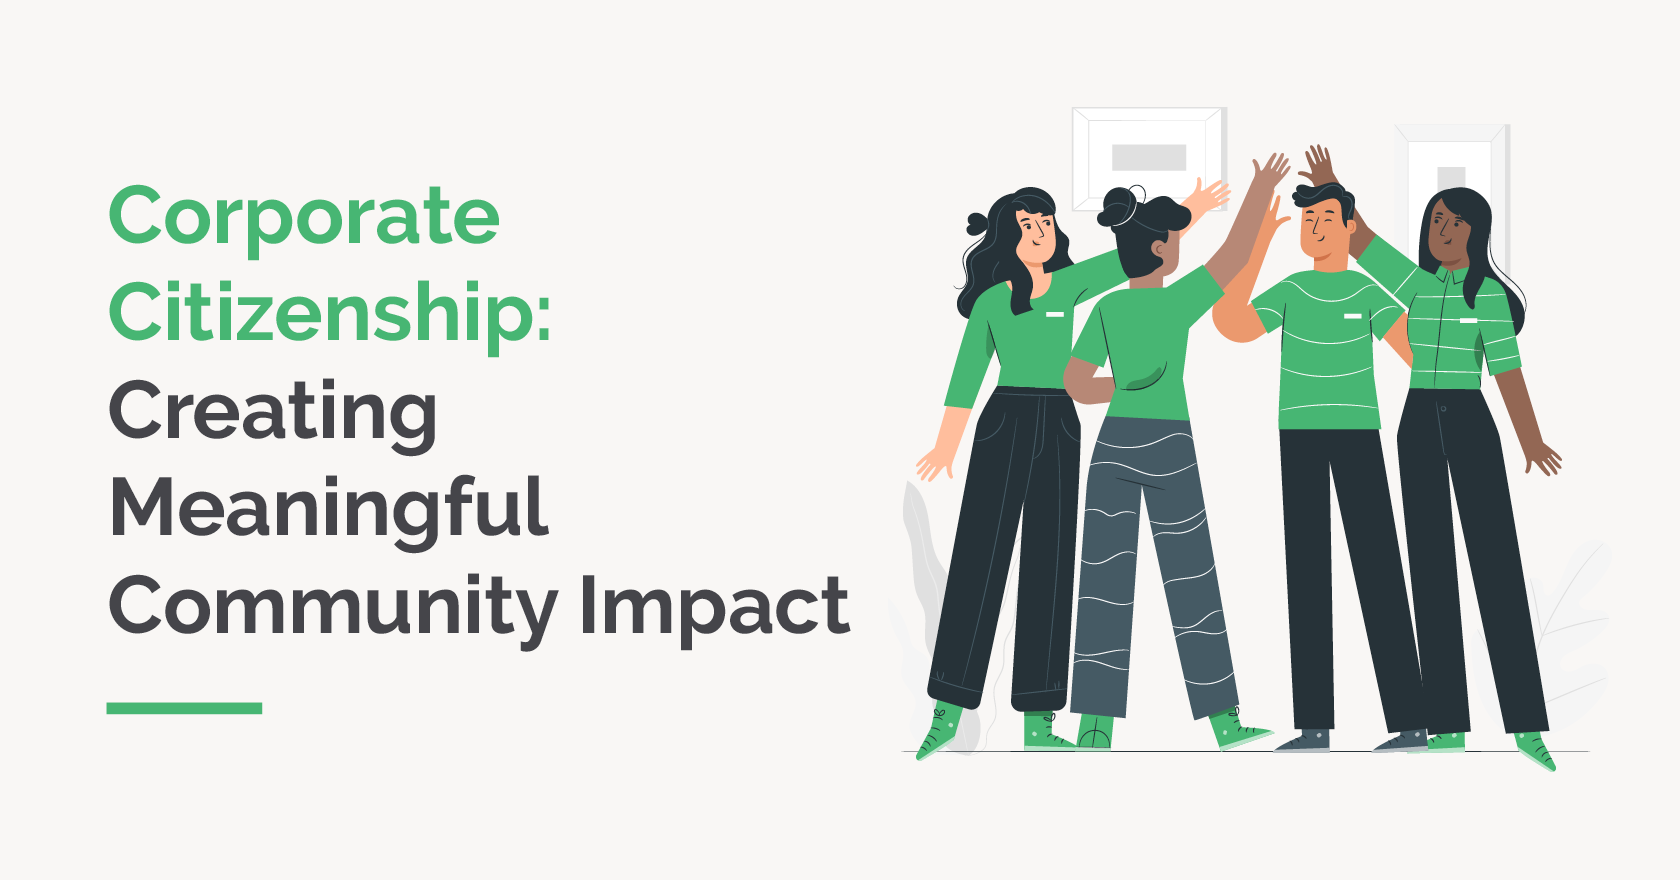 This guide to corporate citizenship will outline the importance of meaningful community impact for all organizations.